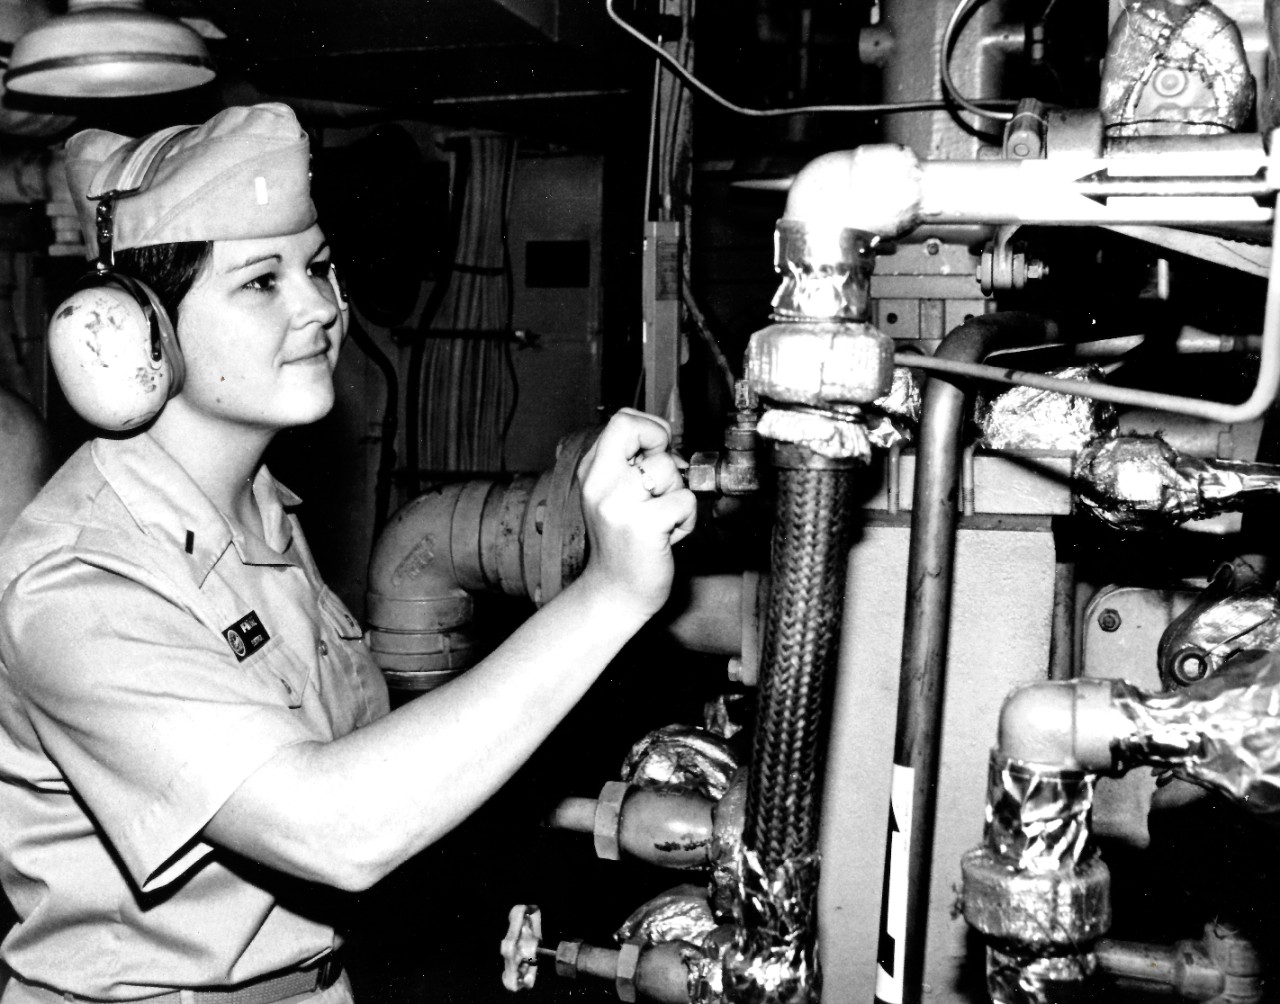 330-CFD-DN-SN-84-01092:   Ensign Roberta McIntyre, November 1981.    McIntyre, the first female to qualify as a Surface Weapons Officer, checks valves aboard the submarine tender USS Dixon (AS-37), where she serves as electrical officer.   Photographed by Delmart Hart, November 1, 1981.   Official U.S. Navy photograph, now in the collections of the National Archives.  